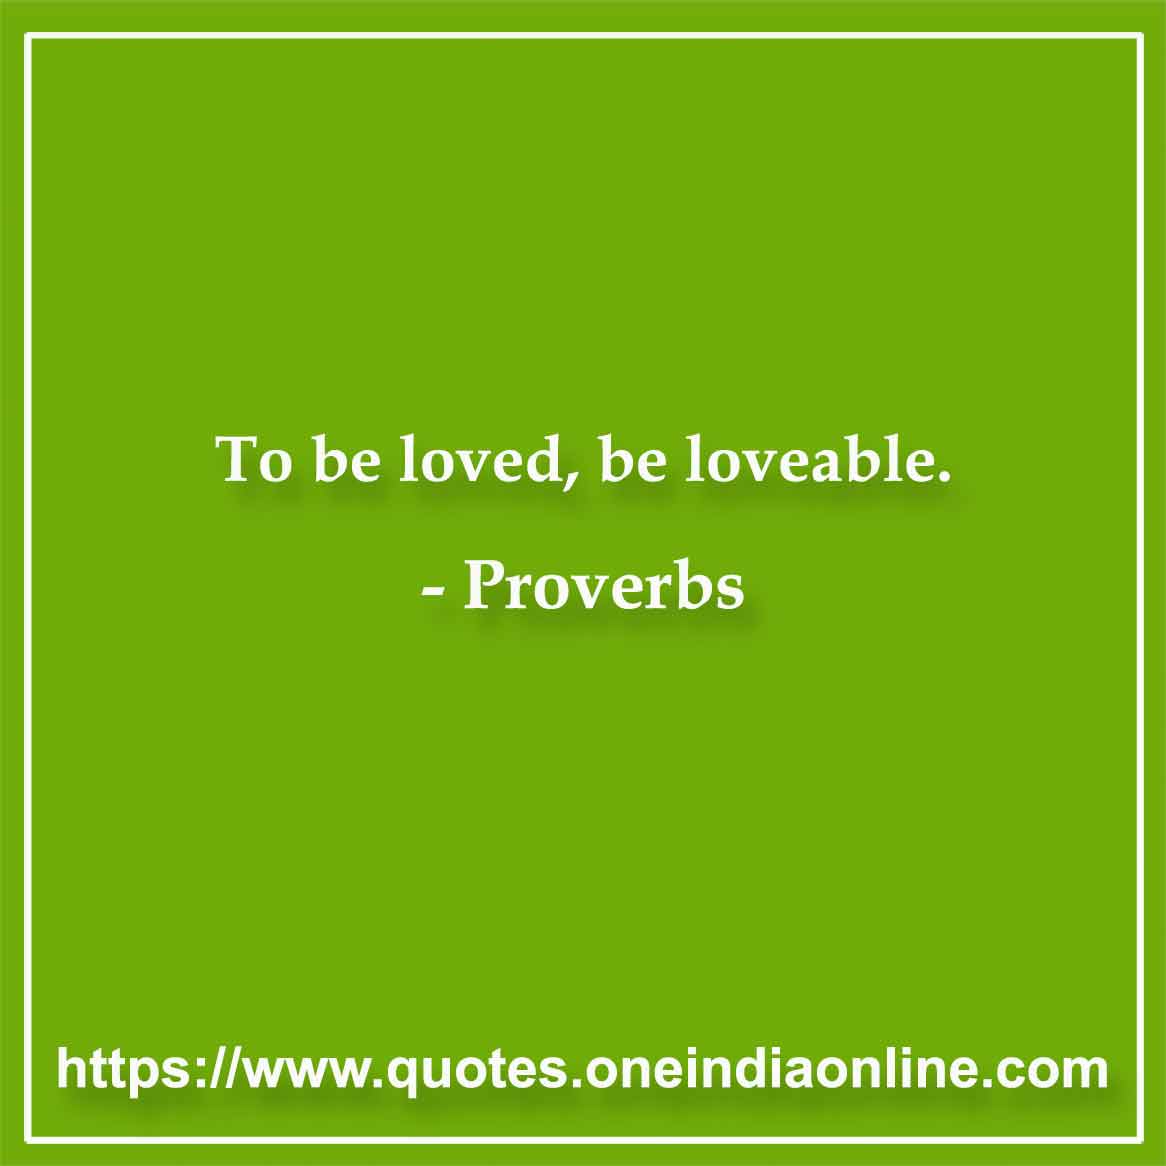 To be loved, be loveable.

